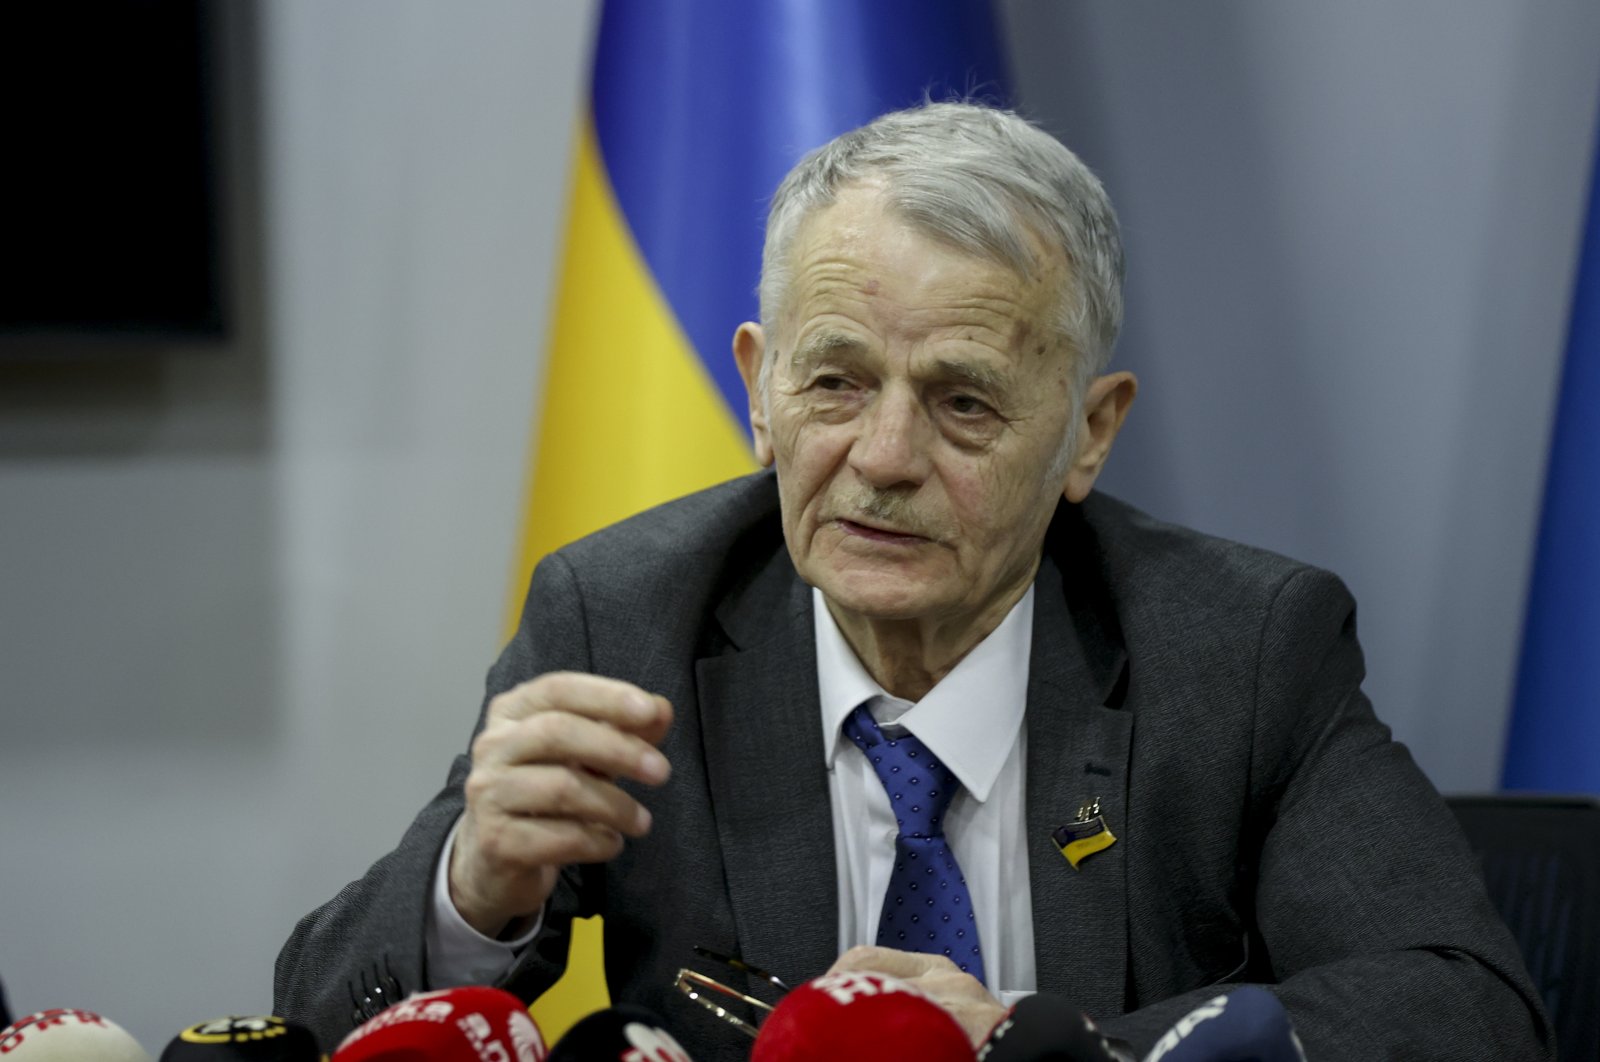 Crimean Tatar leader Mustafa Dzhemilev is seen during a press conference, Istanbul, Turkey, March 1, 2022. (AA Photo)